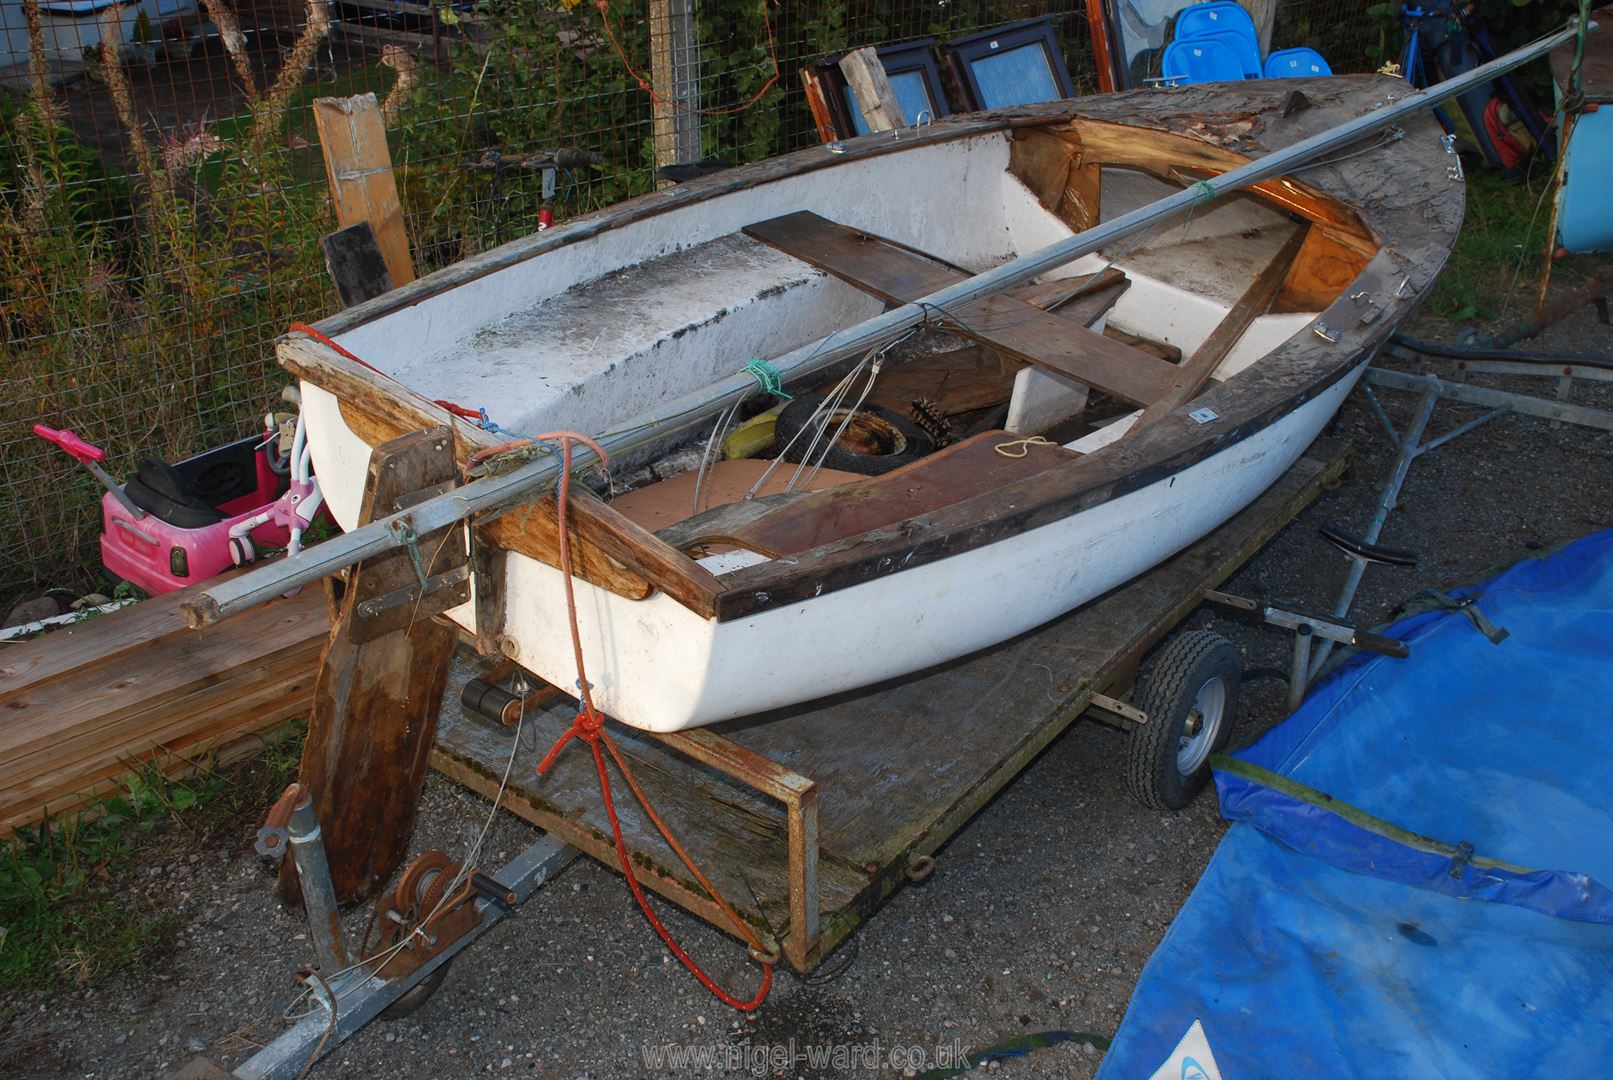 A glass fibre hulled sailing dinghy for restoration with 17' 2" high aluminium mast, fittings, - Image 2 of 14